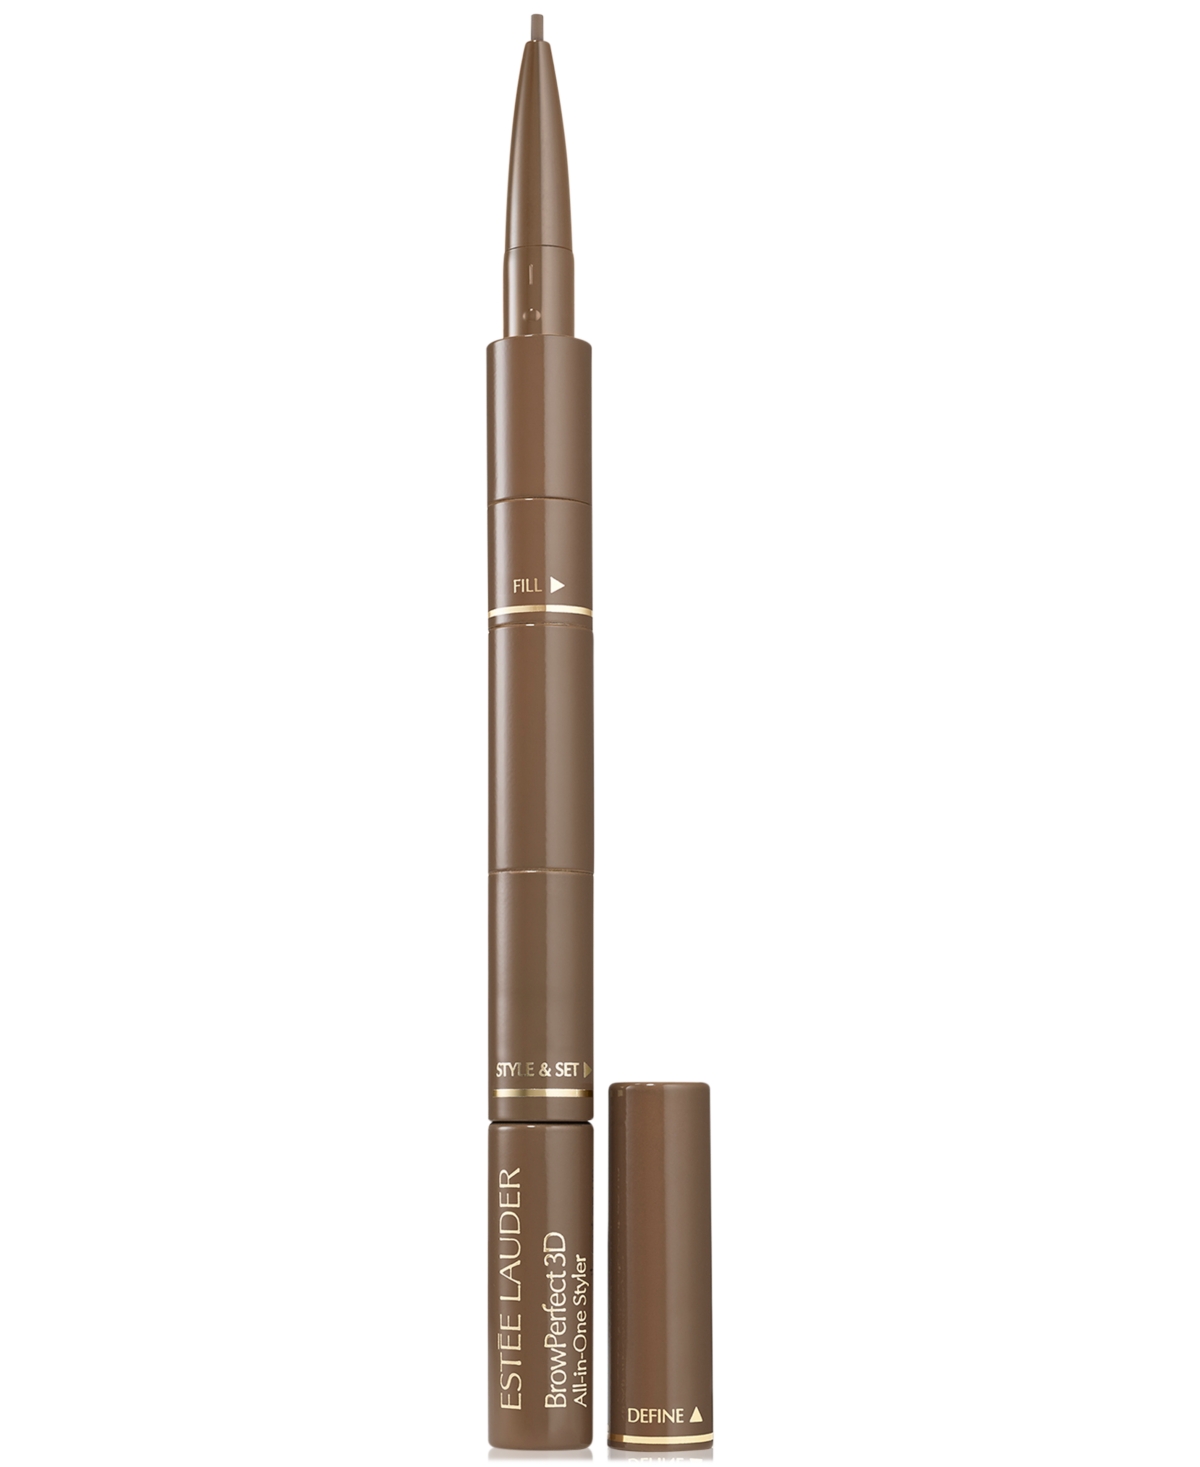 Estée Lauder Browperfect 3d All-in-one Styler In Taupe